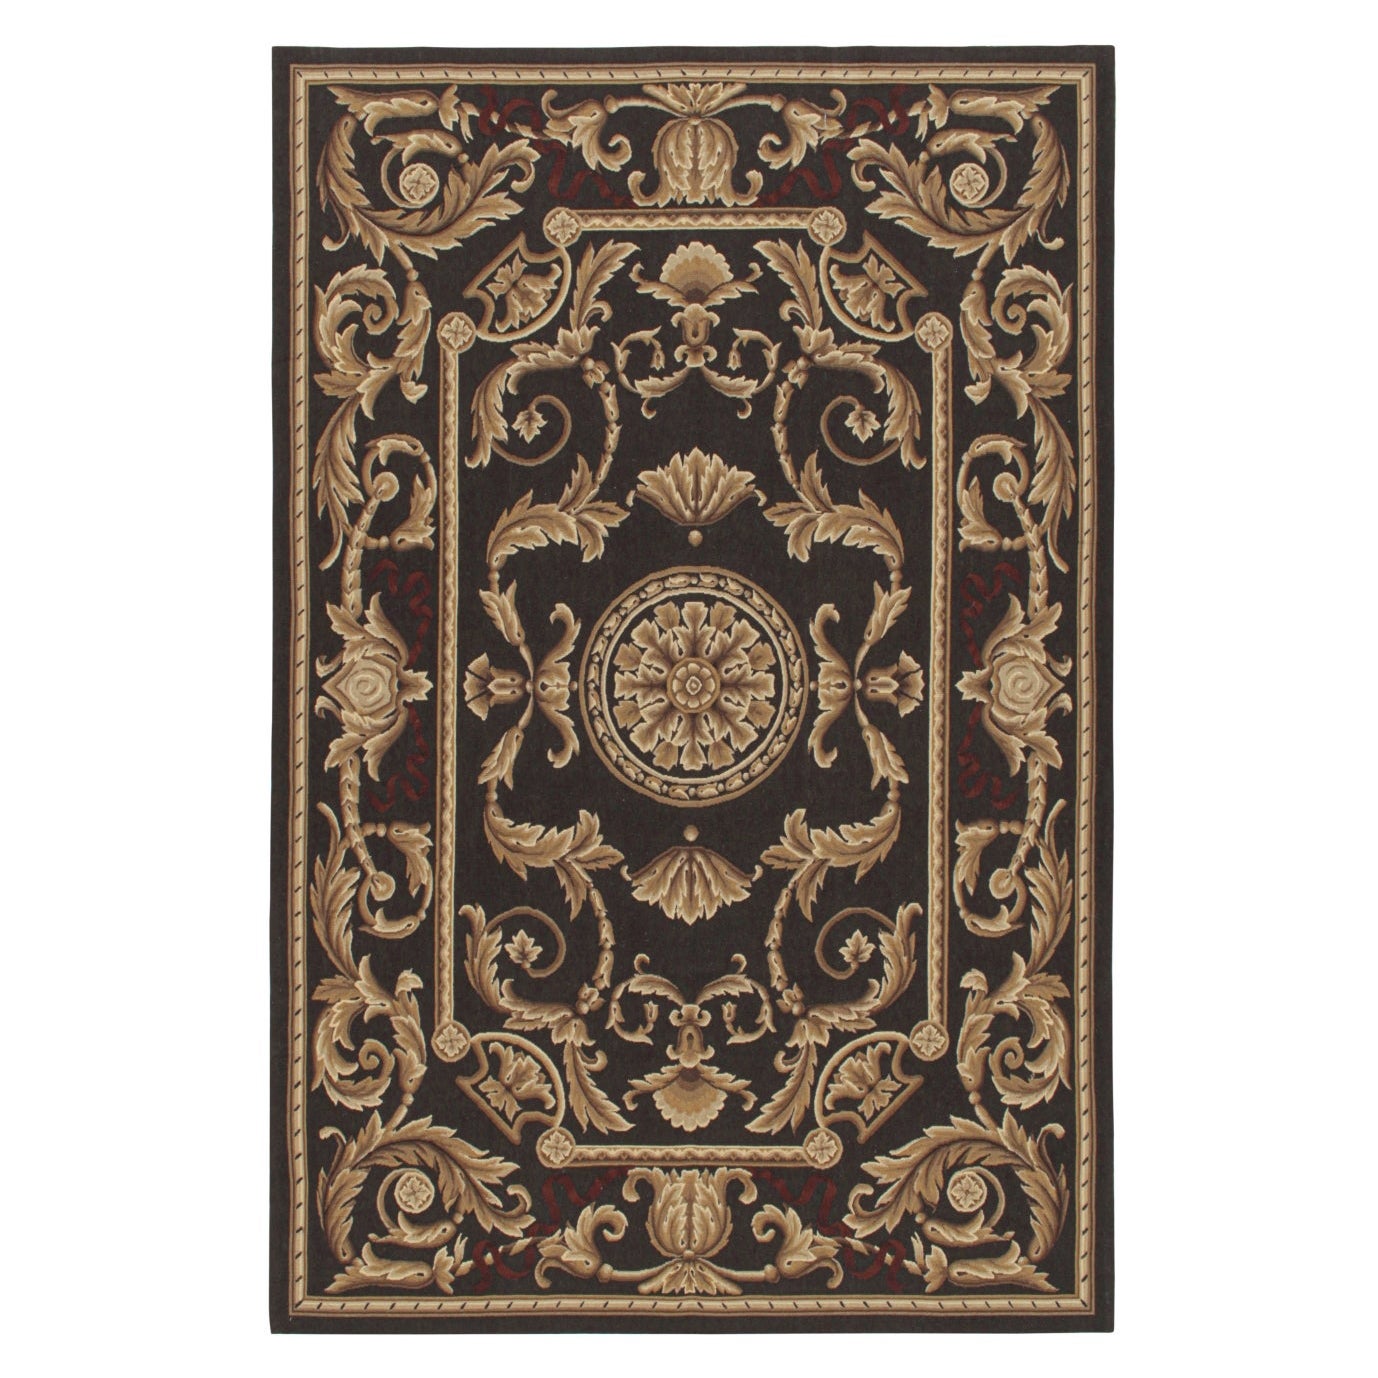 Tapis & Kilim's Aubusson Style Flatweave in Brown with Medallion & Floral Patterns